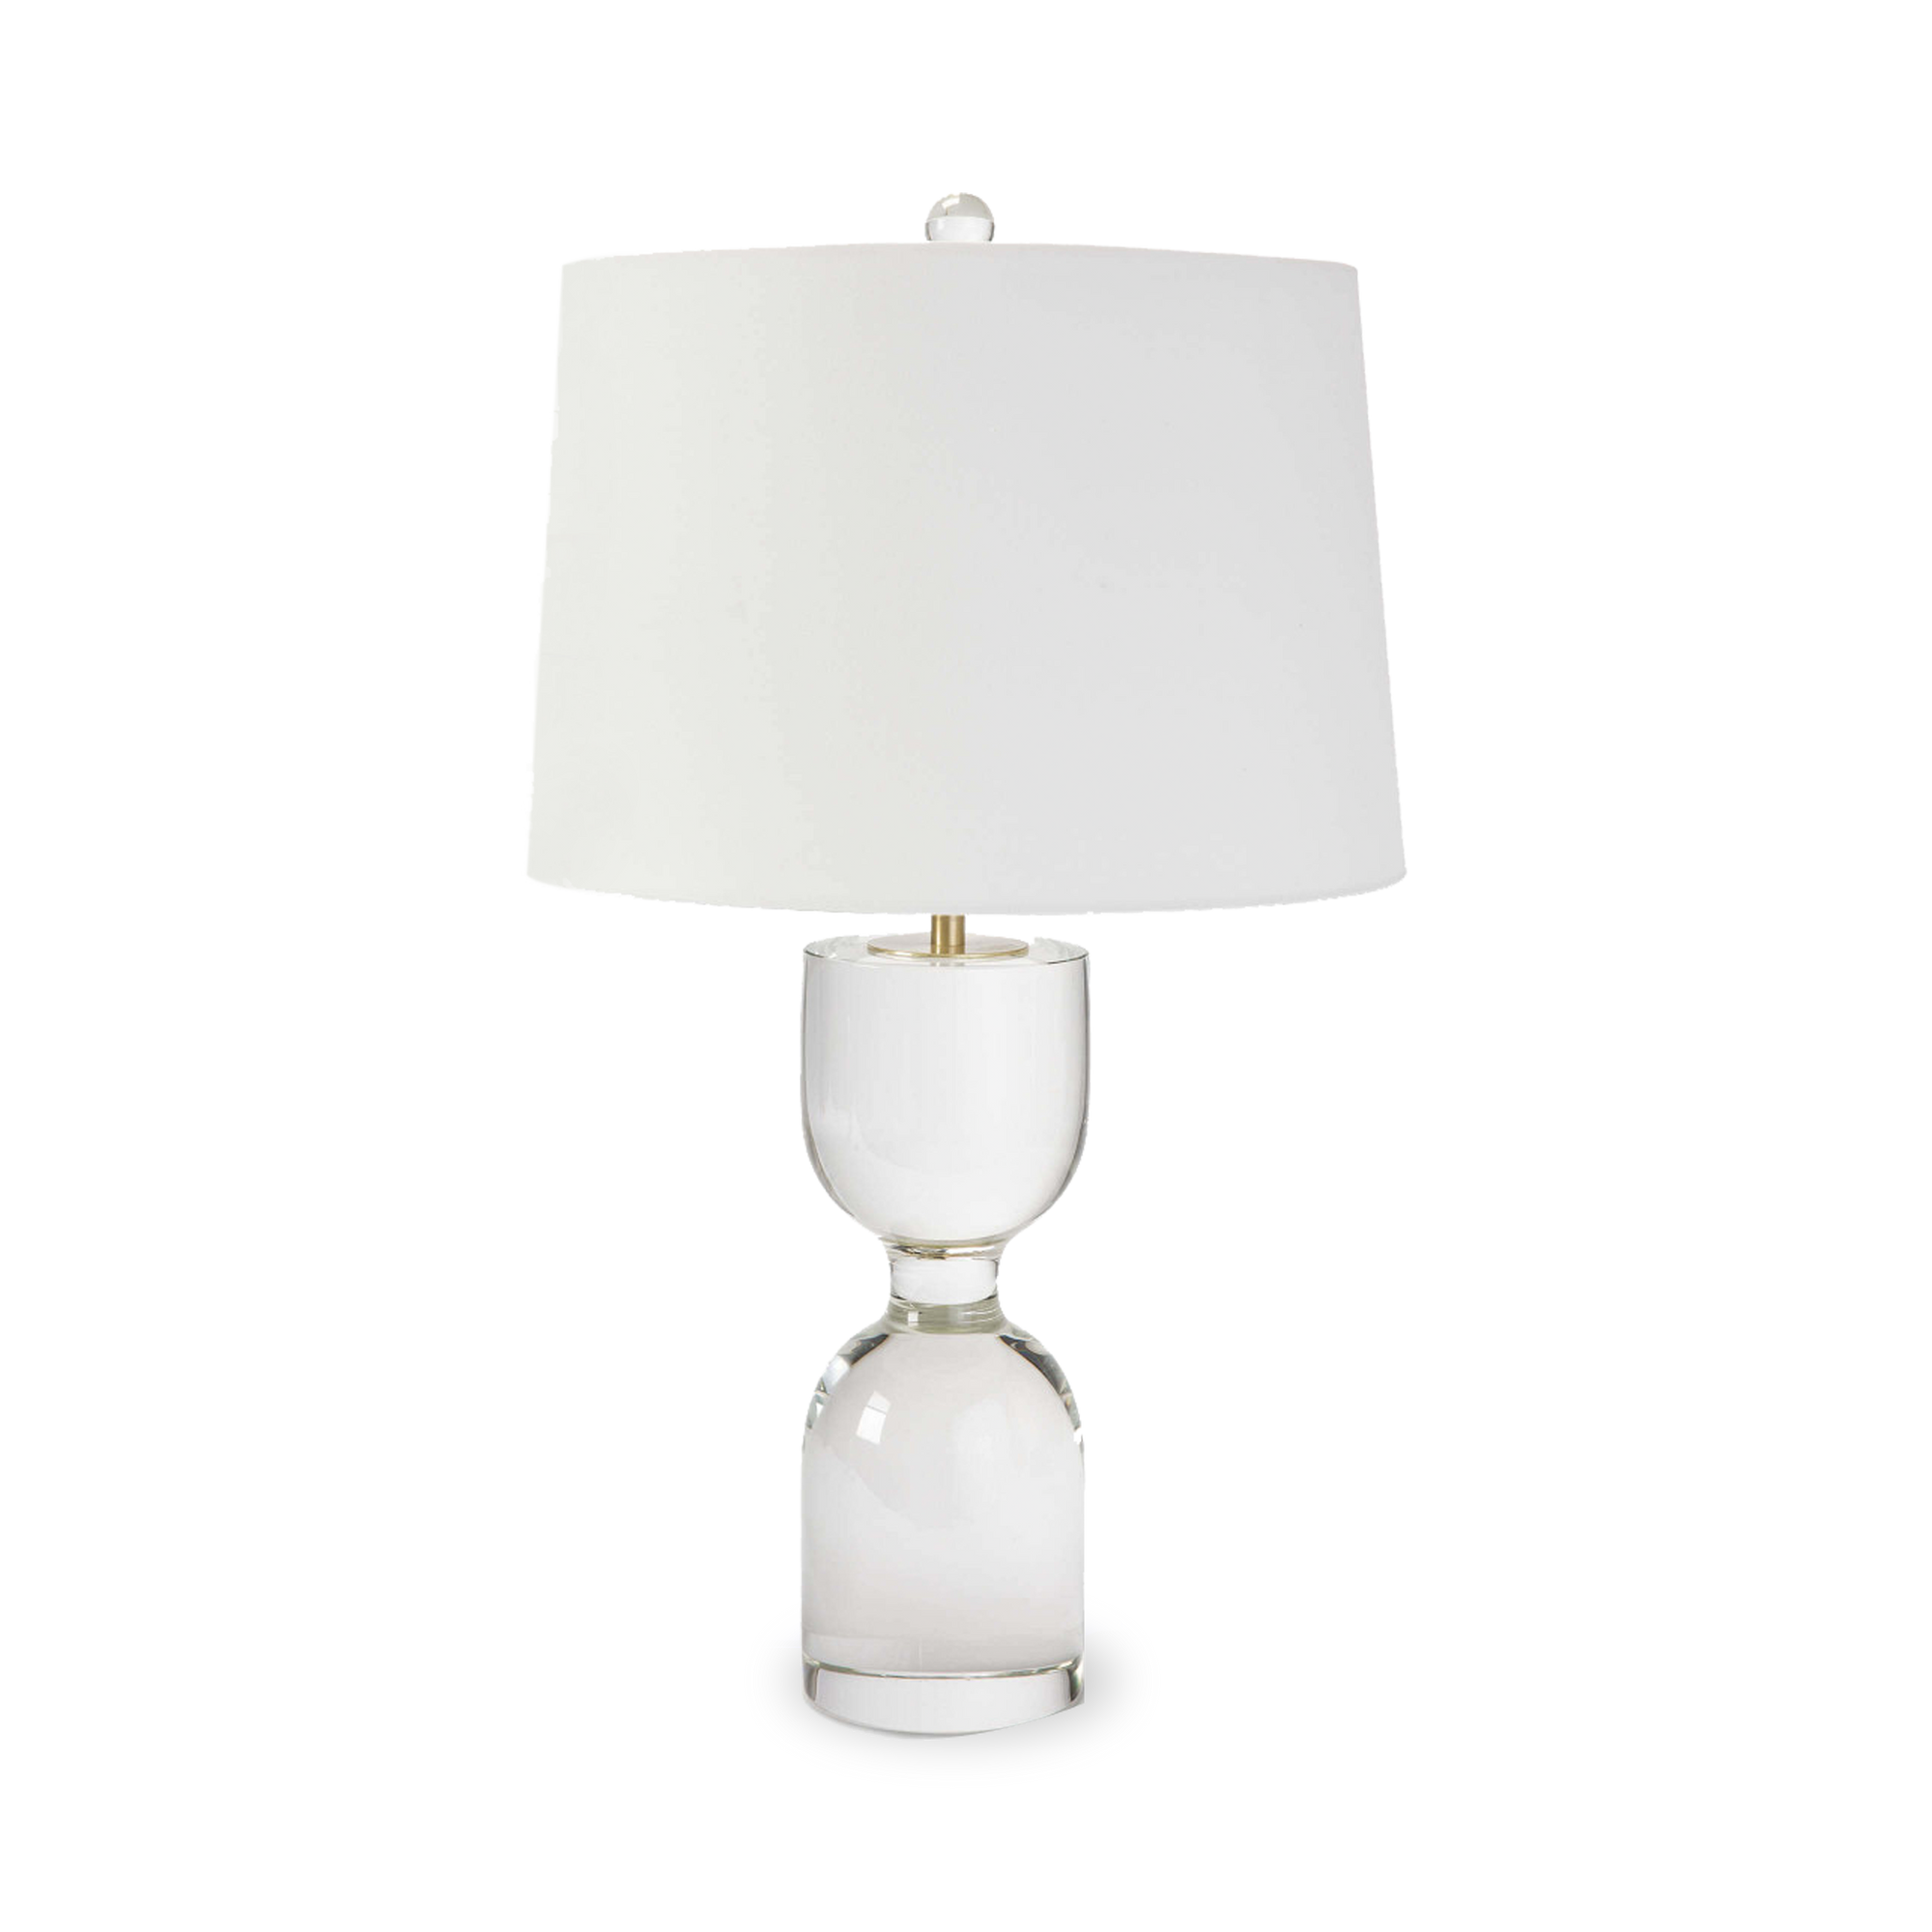 With it's reflective crystal body and matching finial the Darla Table lamp is a modern classic.